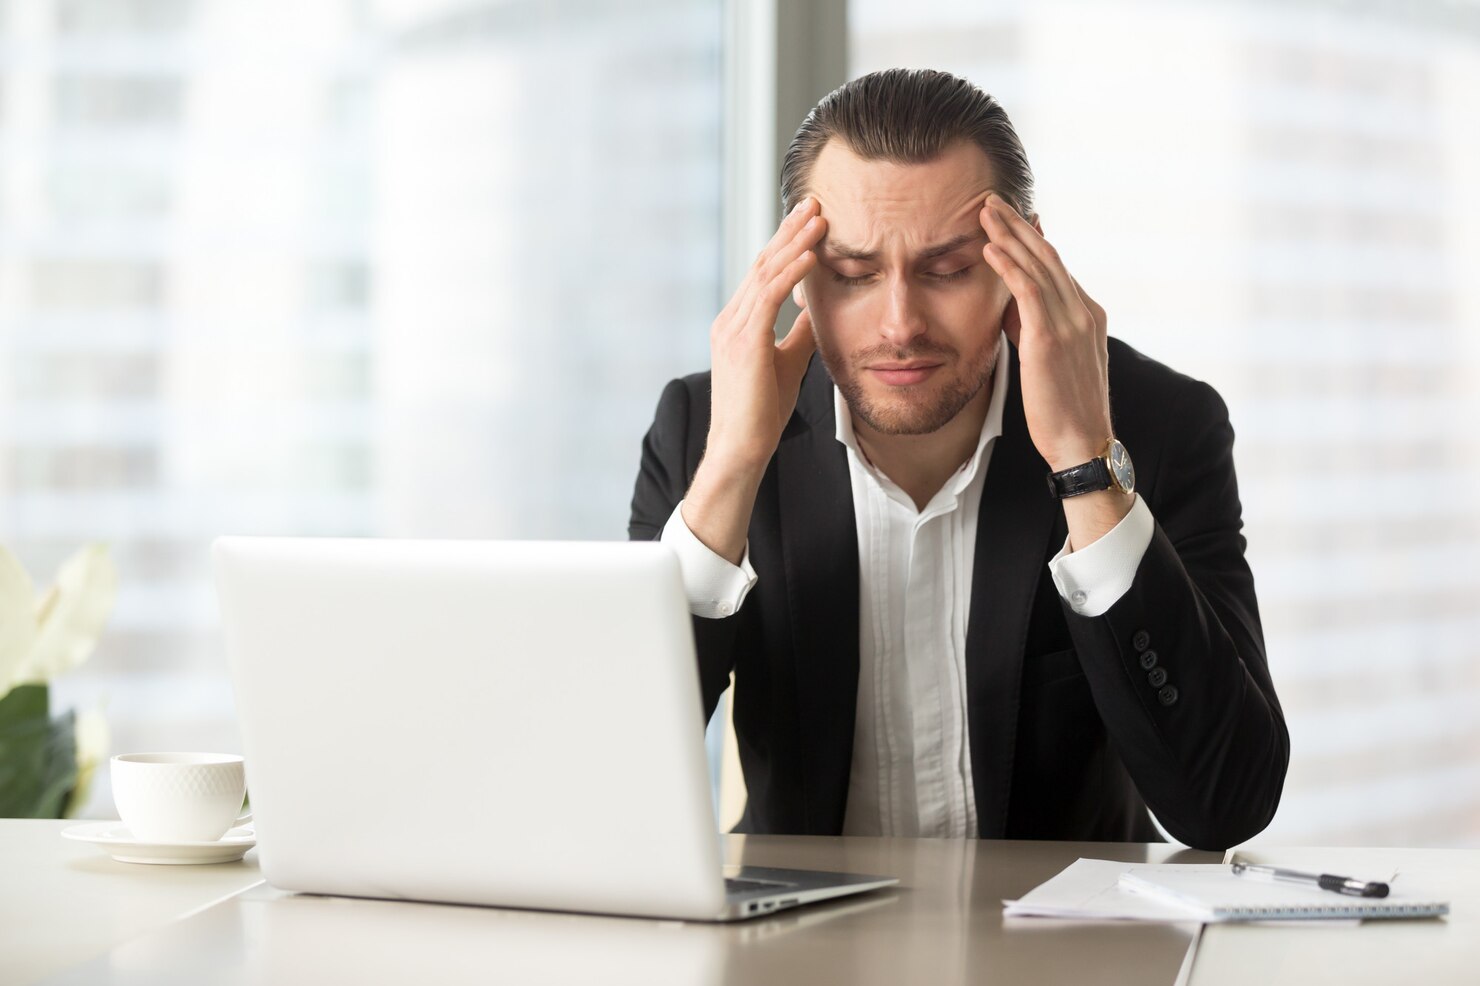 Remote Workers Report Negative Mental Health Impacts, New Study Finds